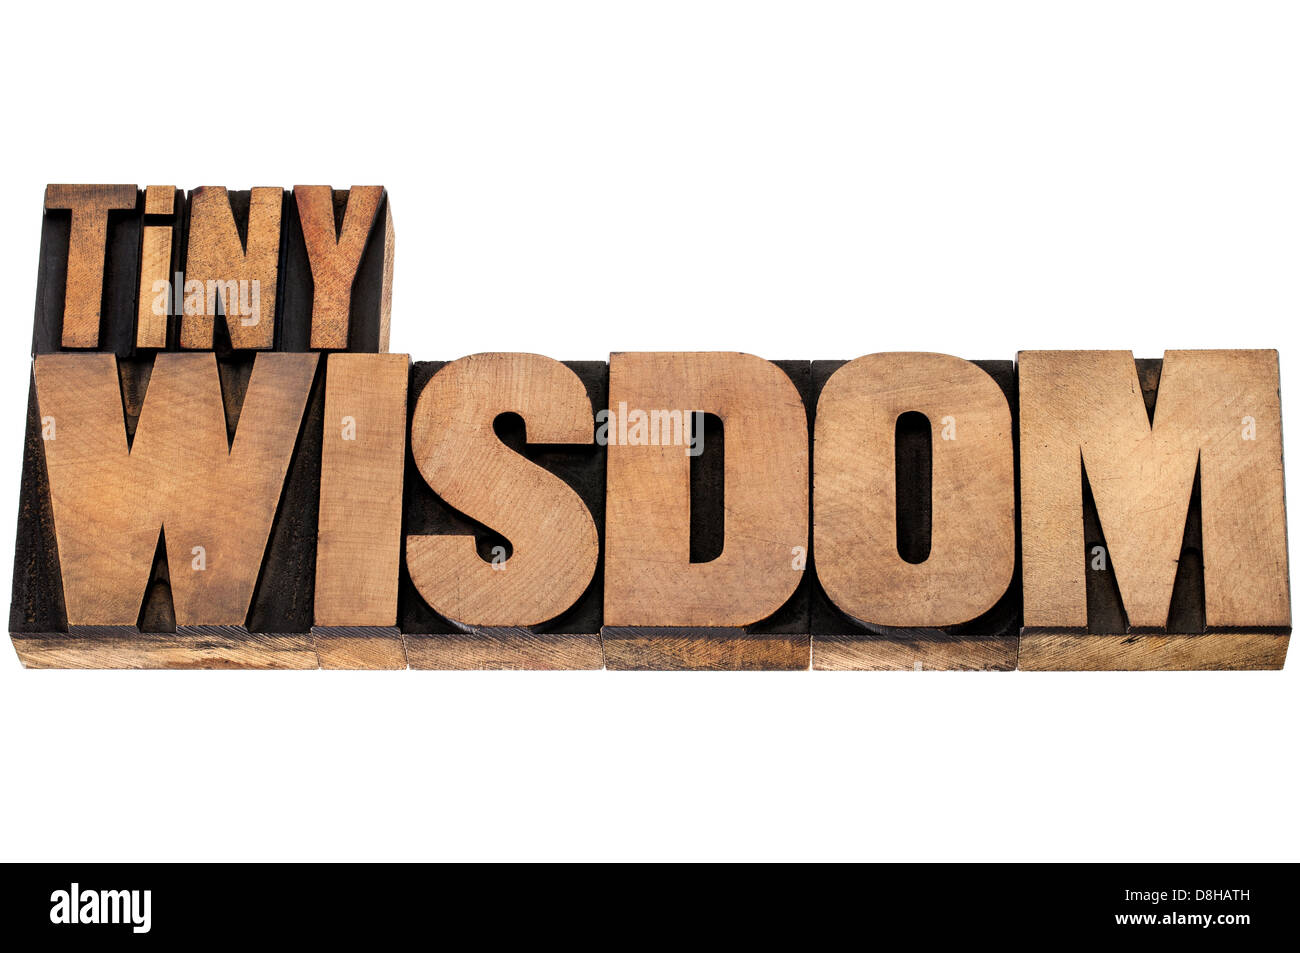 tiny wisdom - isolated text in vintage letterpress wood type Stock Photo